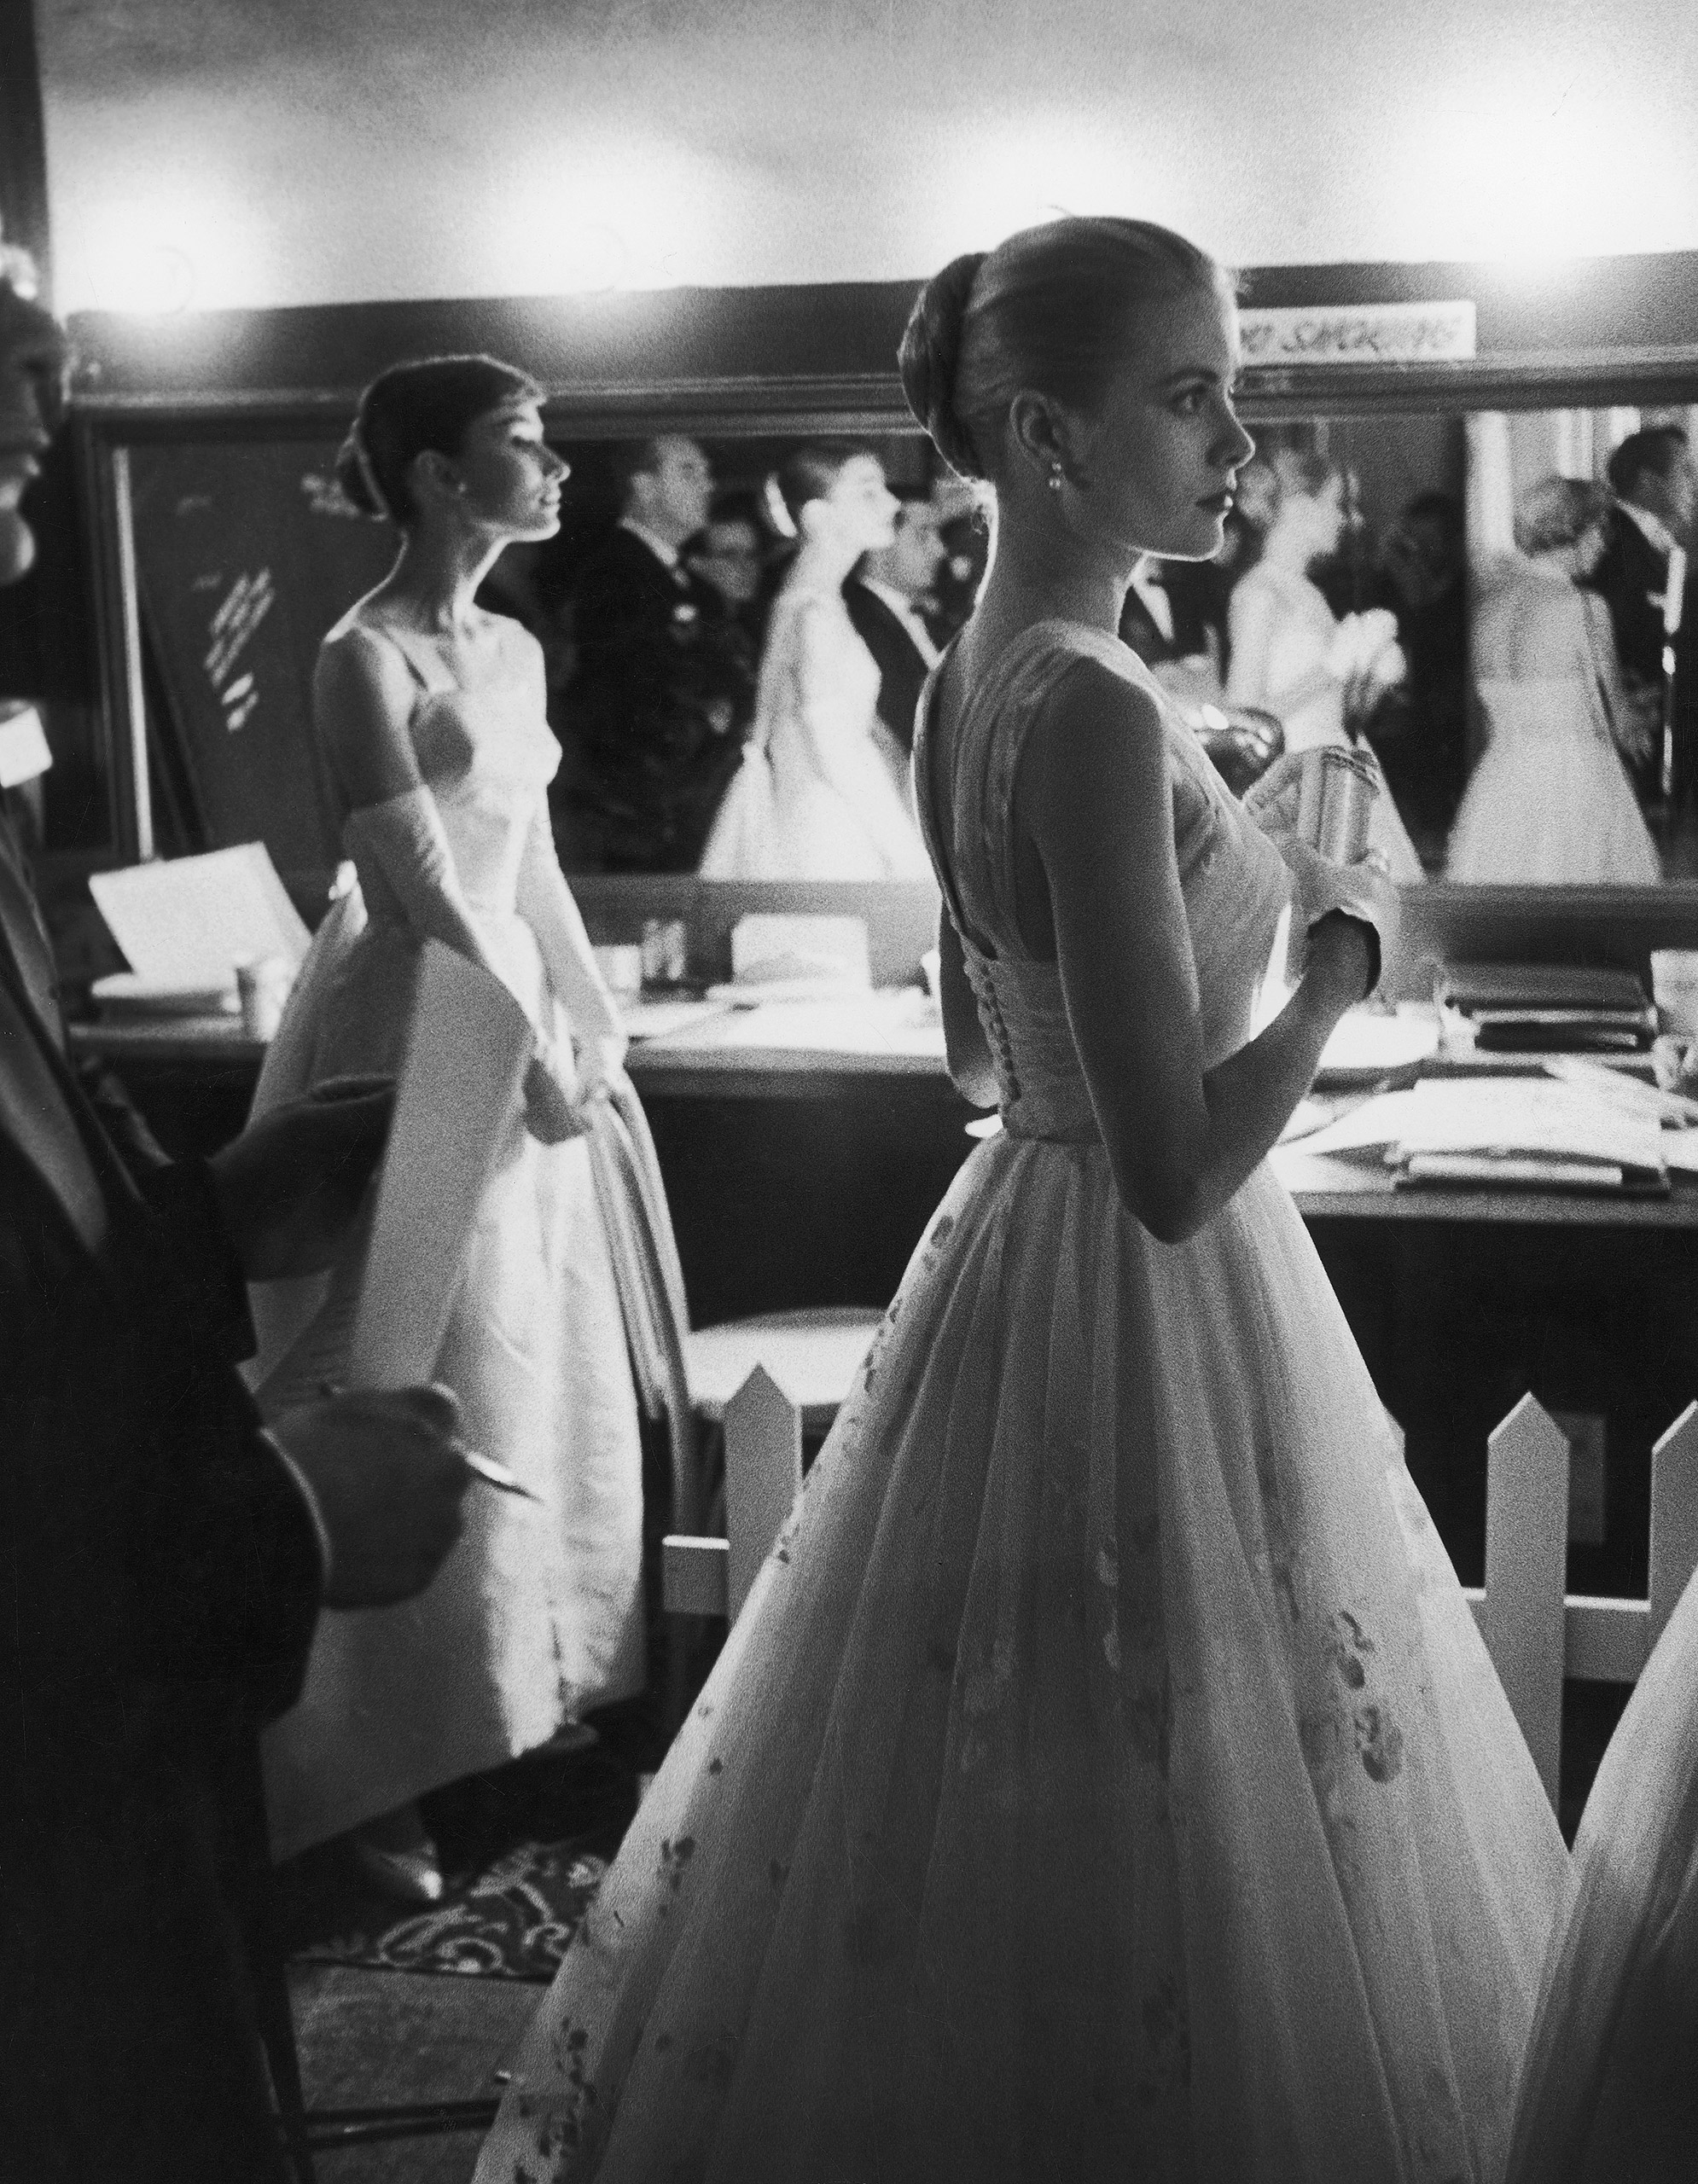 Award presenters Audrey Hepburn and Grace Kelly waiting backstage at the RKO Pantages Theatre during the 28th Annual Academy Awards, 1956.